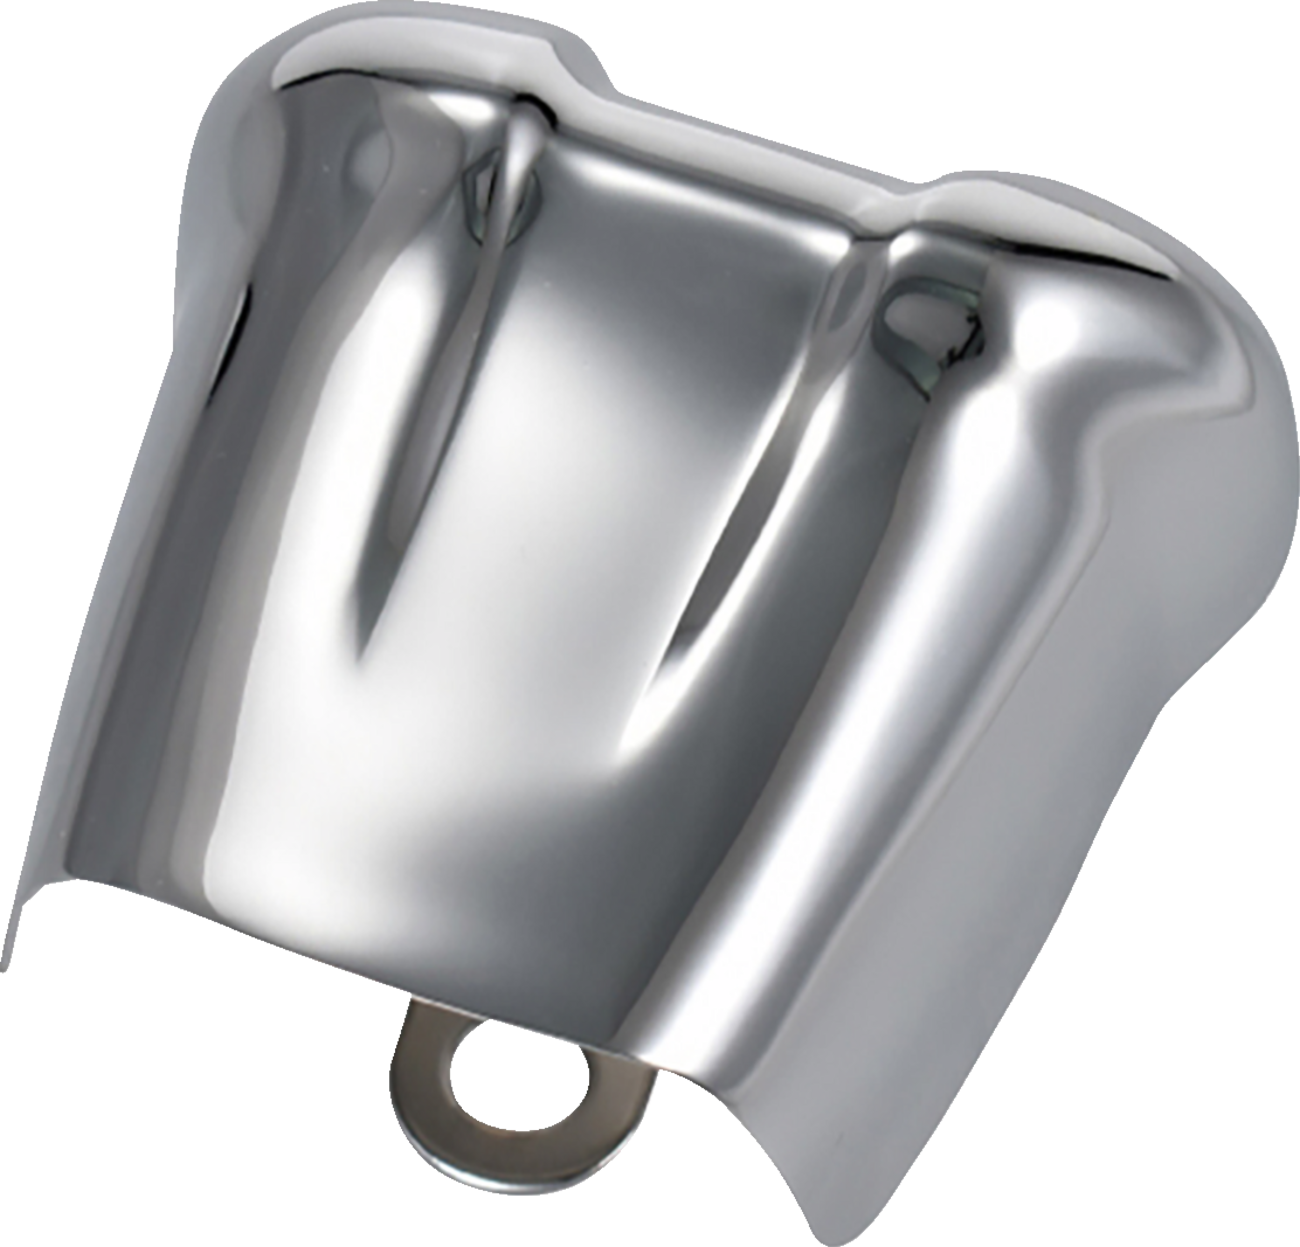 Drag Specialties Chrome Waterfall Horn Cover for Side Mount Horn Harley Davidson